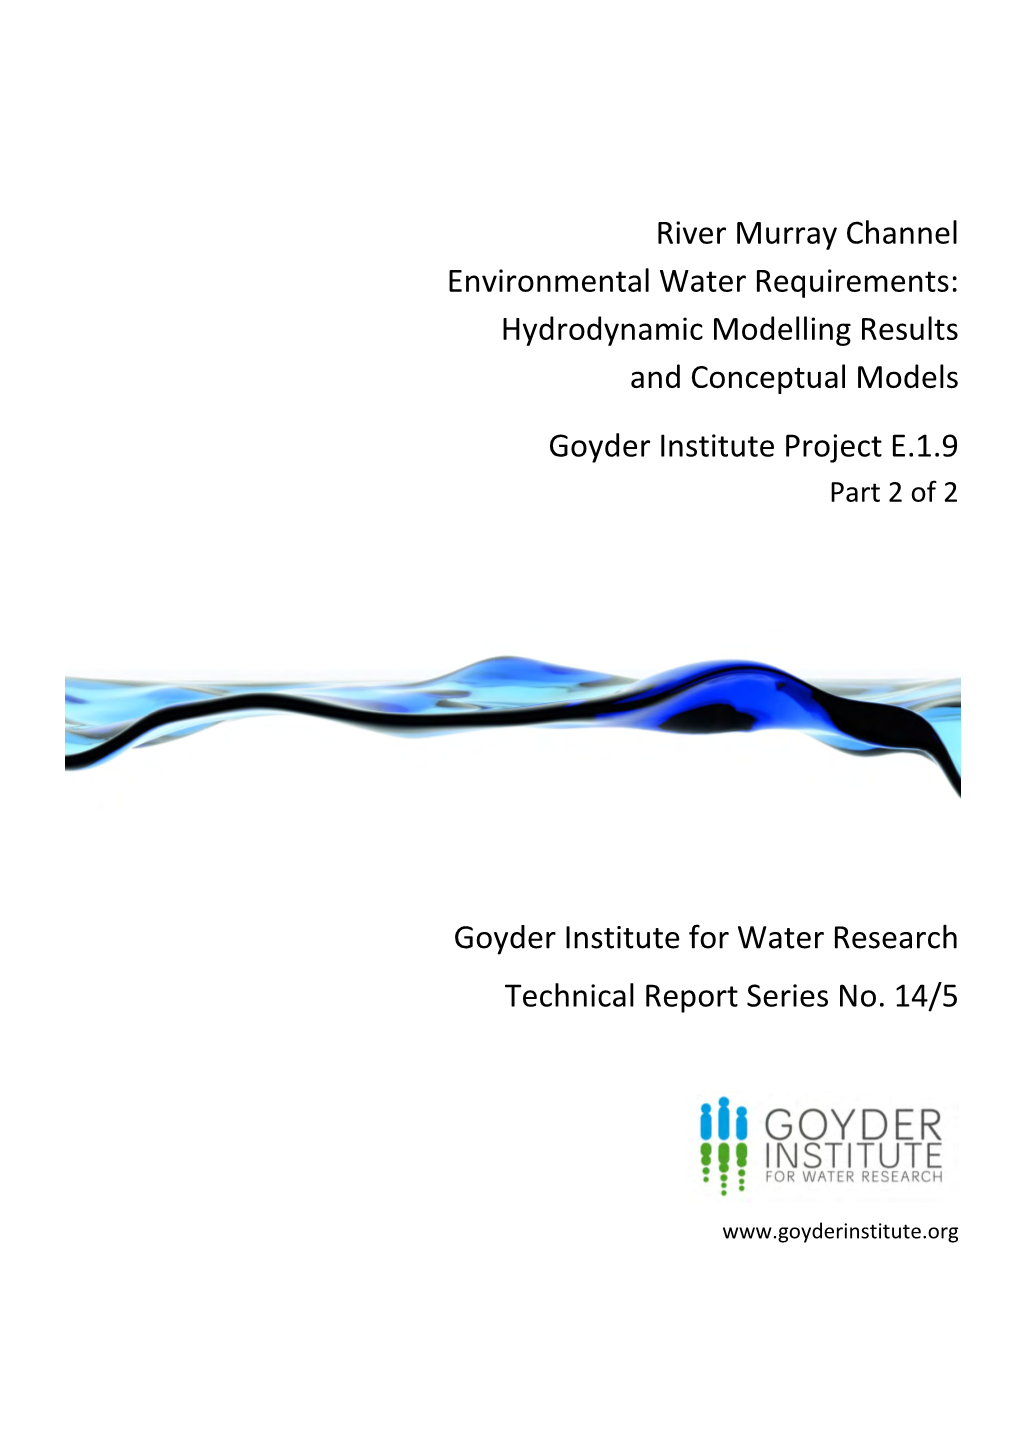 River Murray Channel Environmental Water Requirements: Hydrodynamic Modelling Results and Conceptual Models